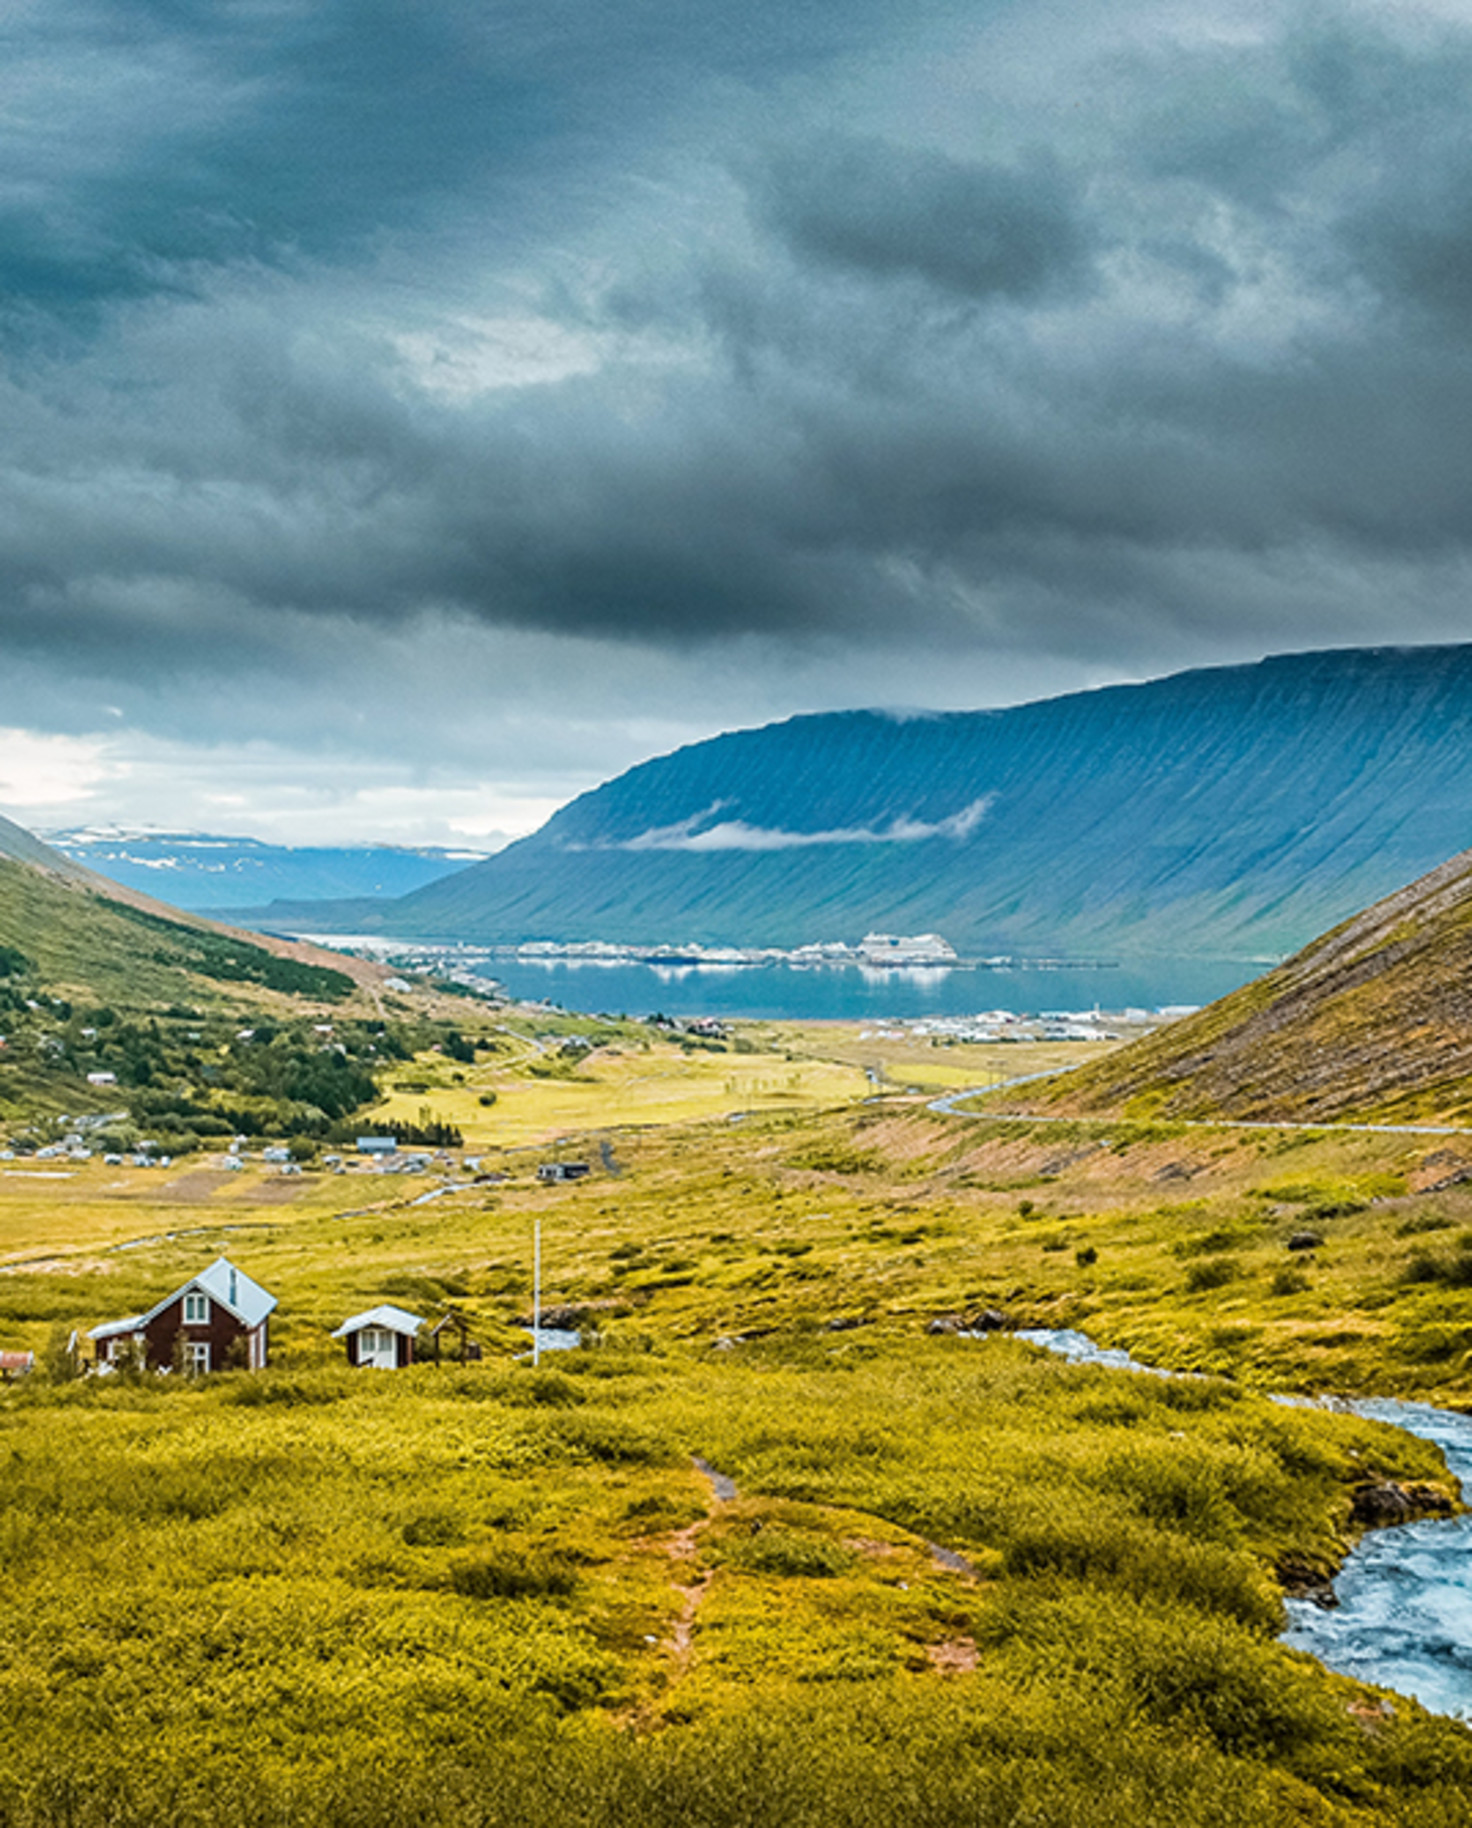 A skyline view of mountains in the Westfjords, Iceland with small houses in the central valley.